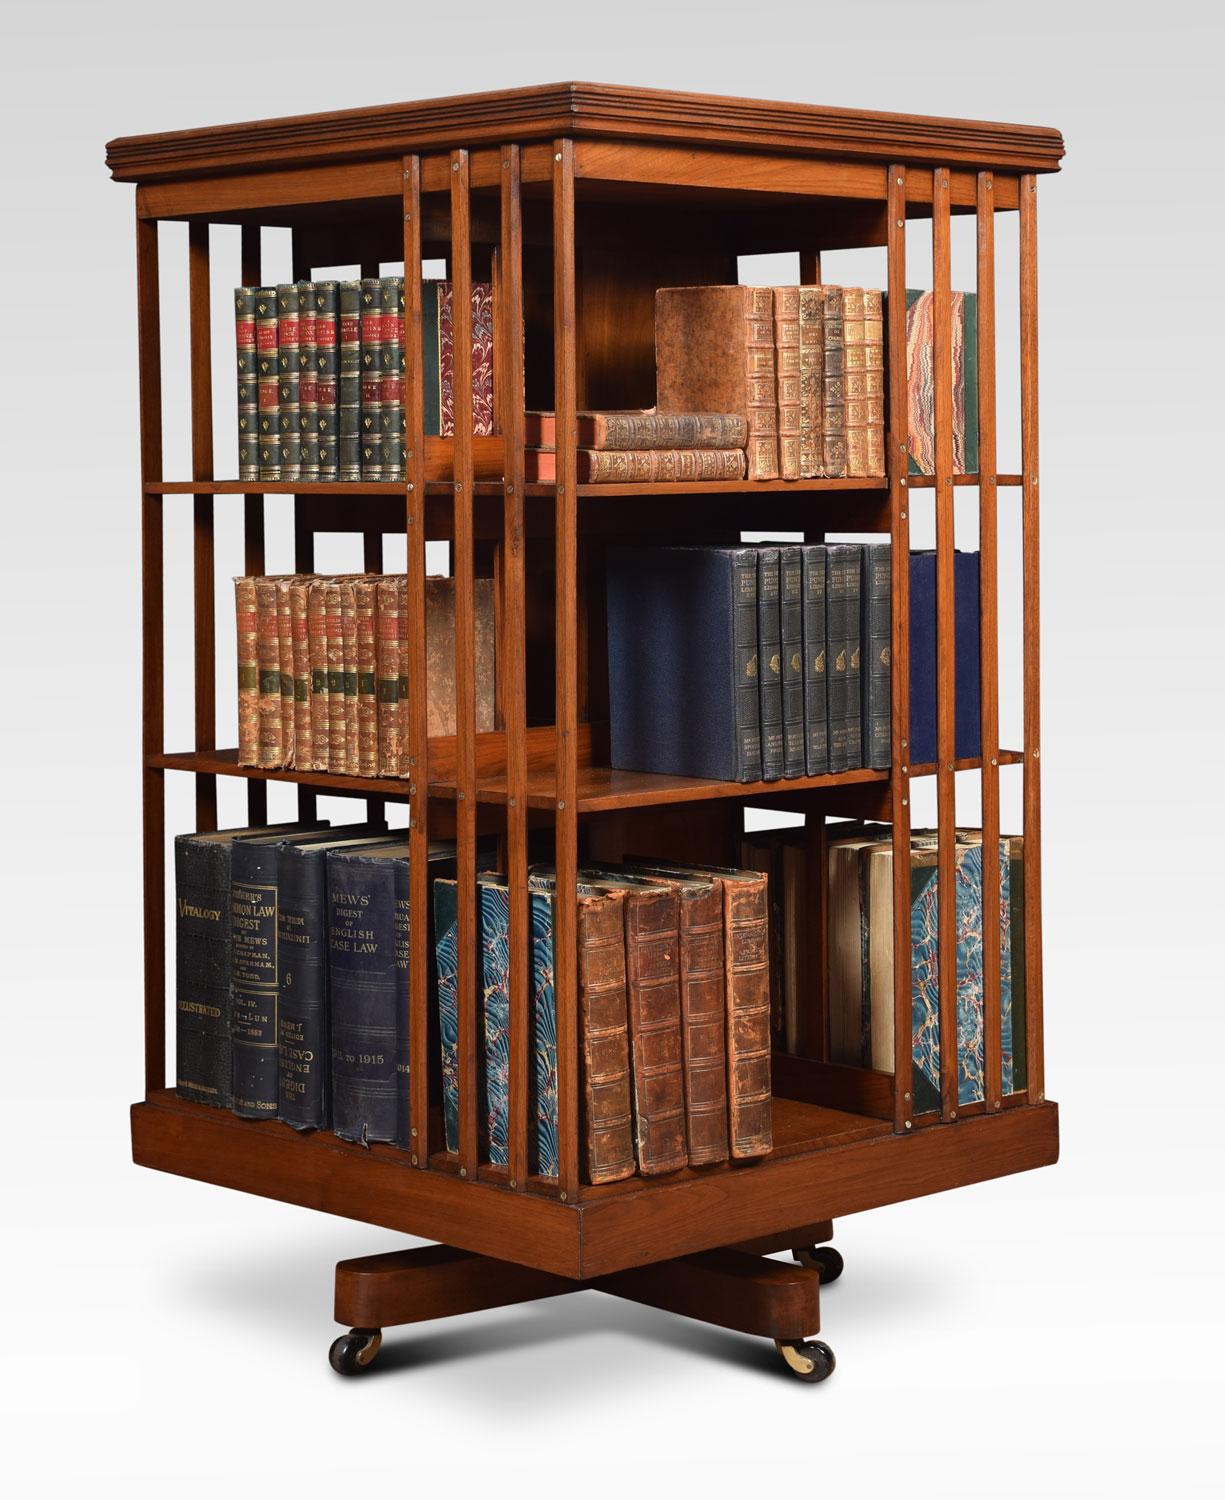 Large walnut three-tier revolving bookcase, the square moulded top above an arrangement off shelves raised up on cruciform base with brass caps and ceramic castors.
Dimensions:
Height 45 inches
Width 23.5 inches
Depth 23.5 inches.